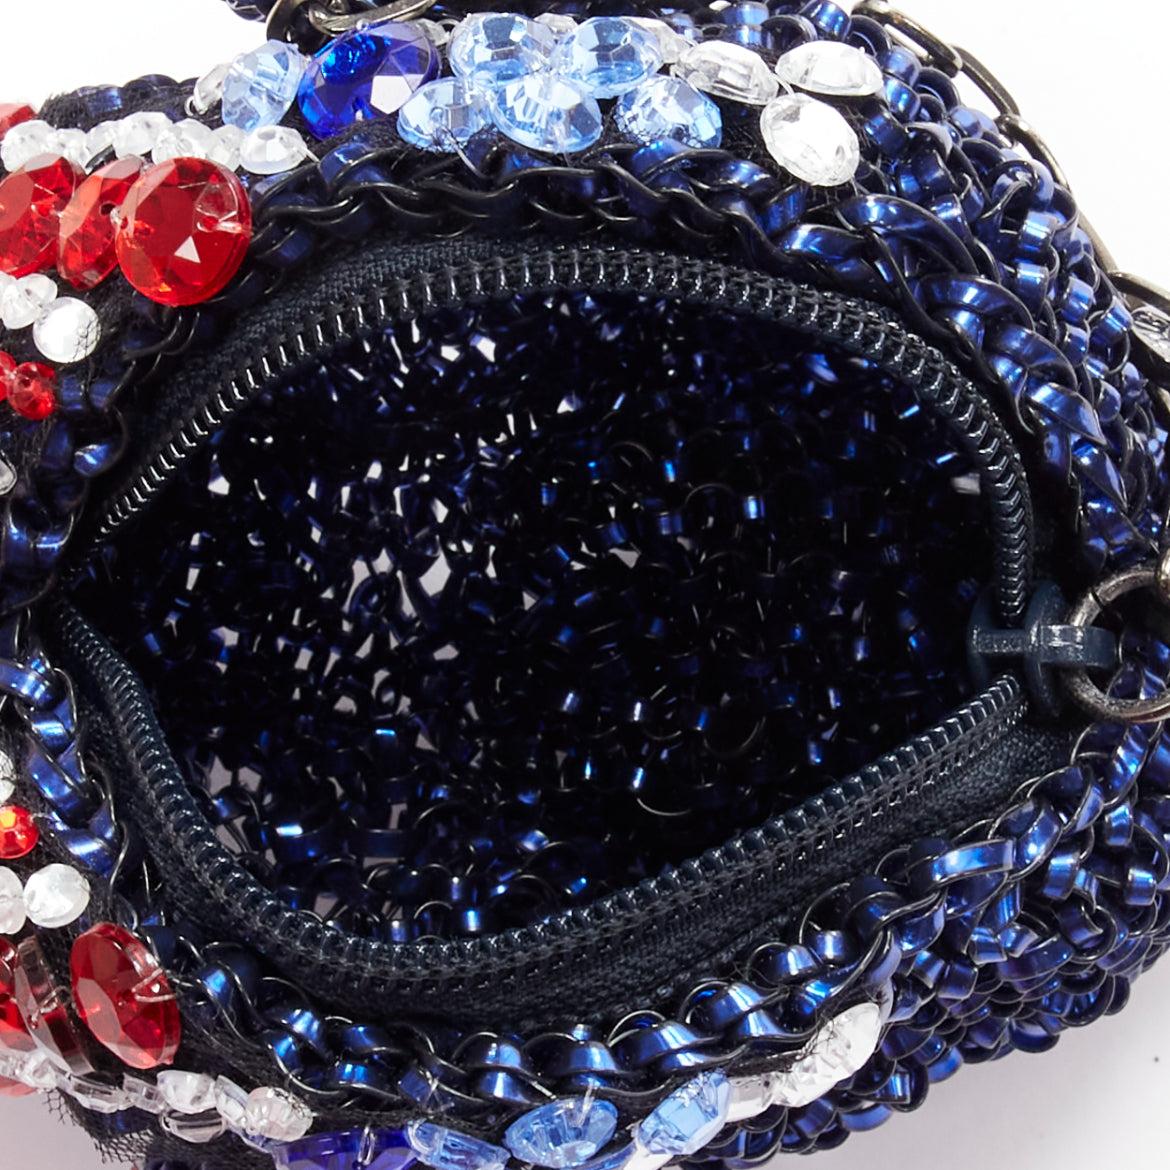 rare ANTEPRIMA Wire Bag blue red crystal Union Jack elephant clutch For Sale 5